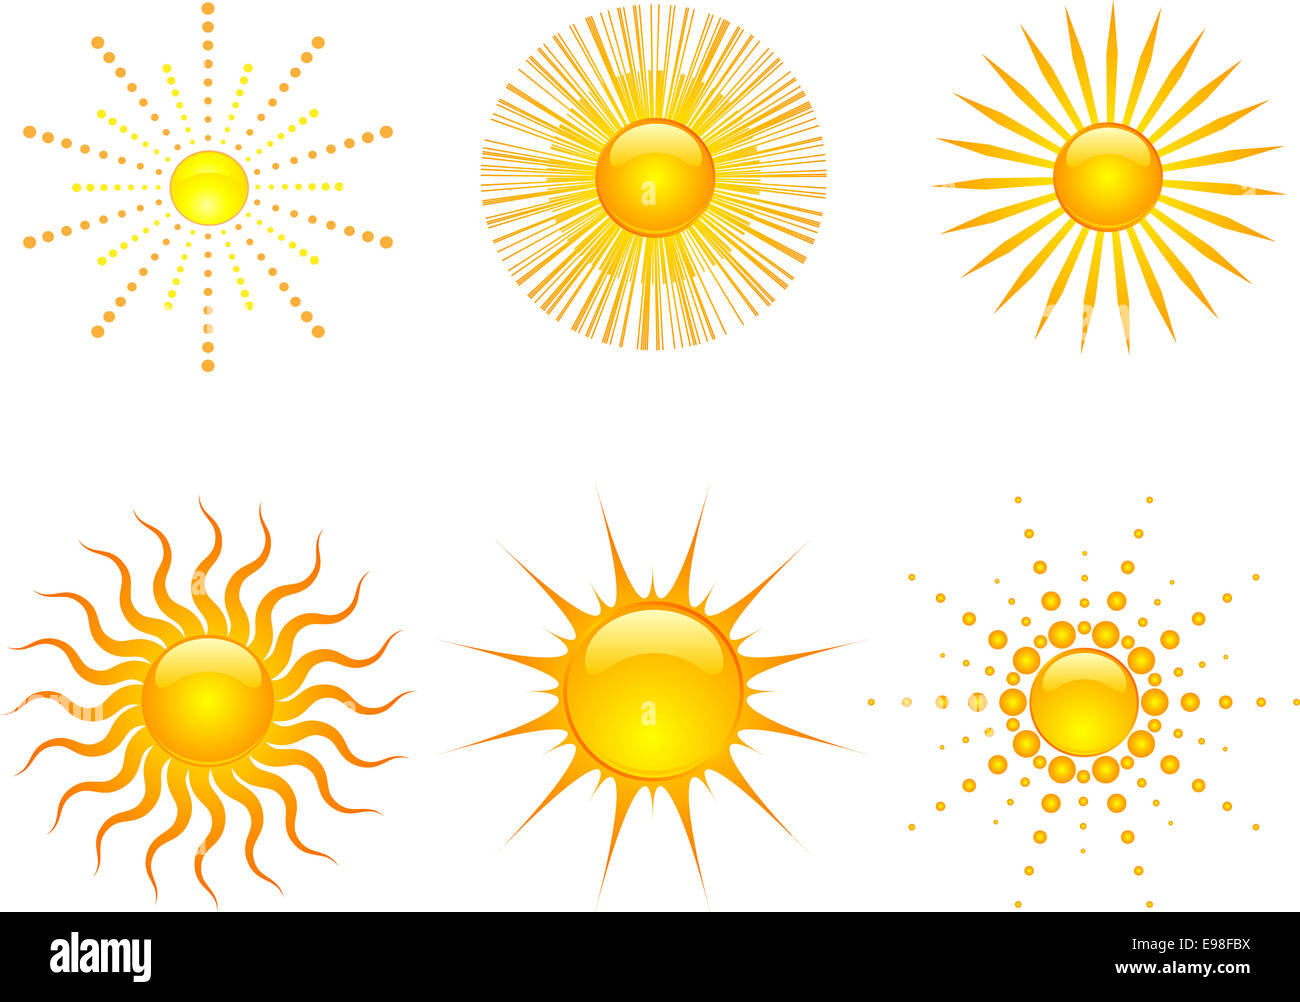 Various styles of sun icons Stock Photo